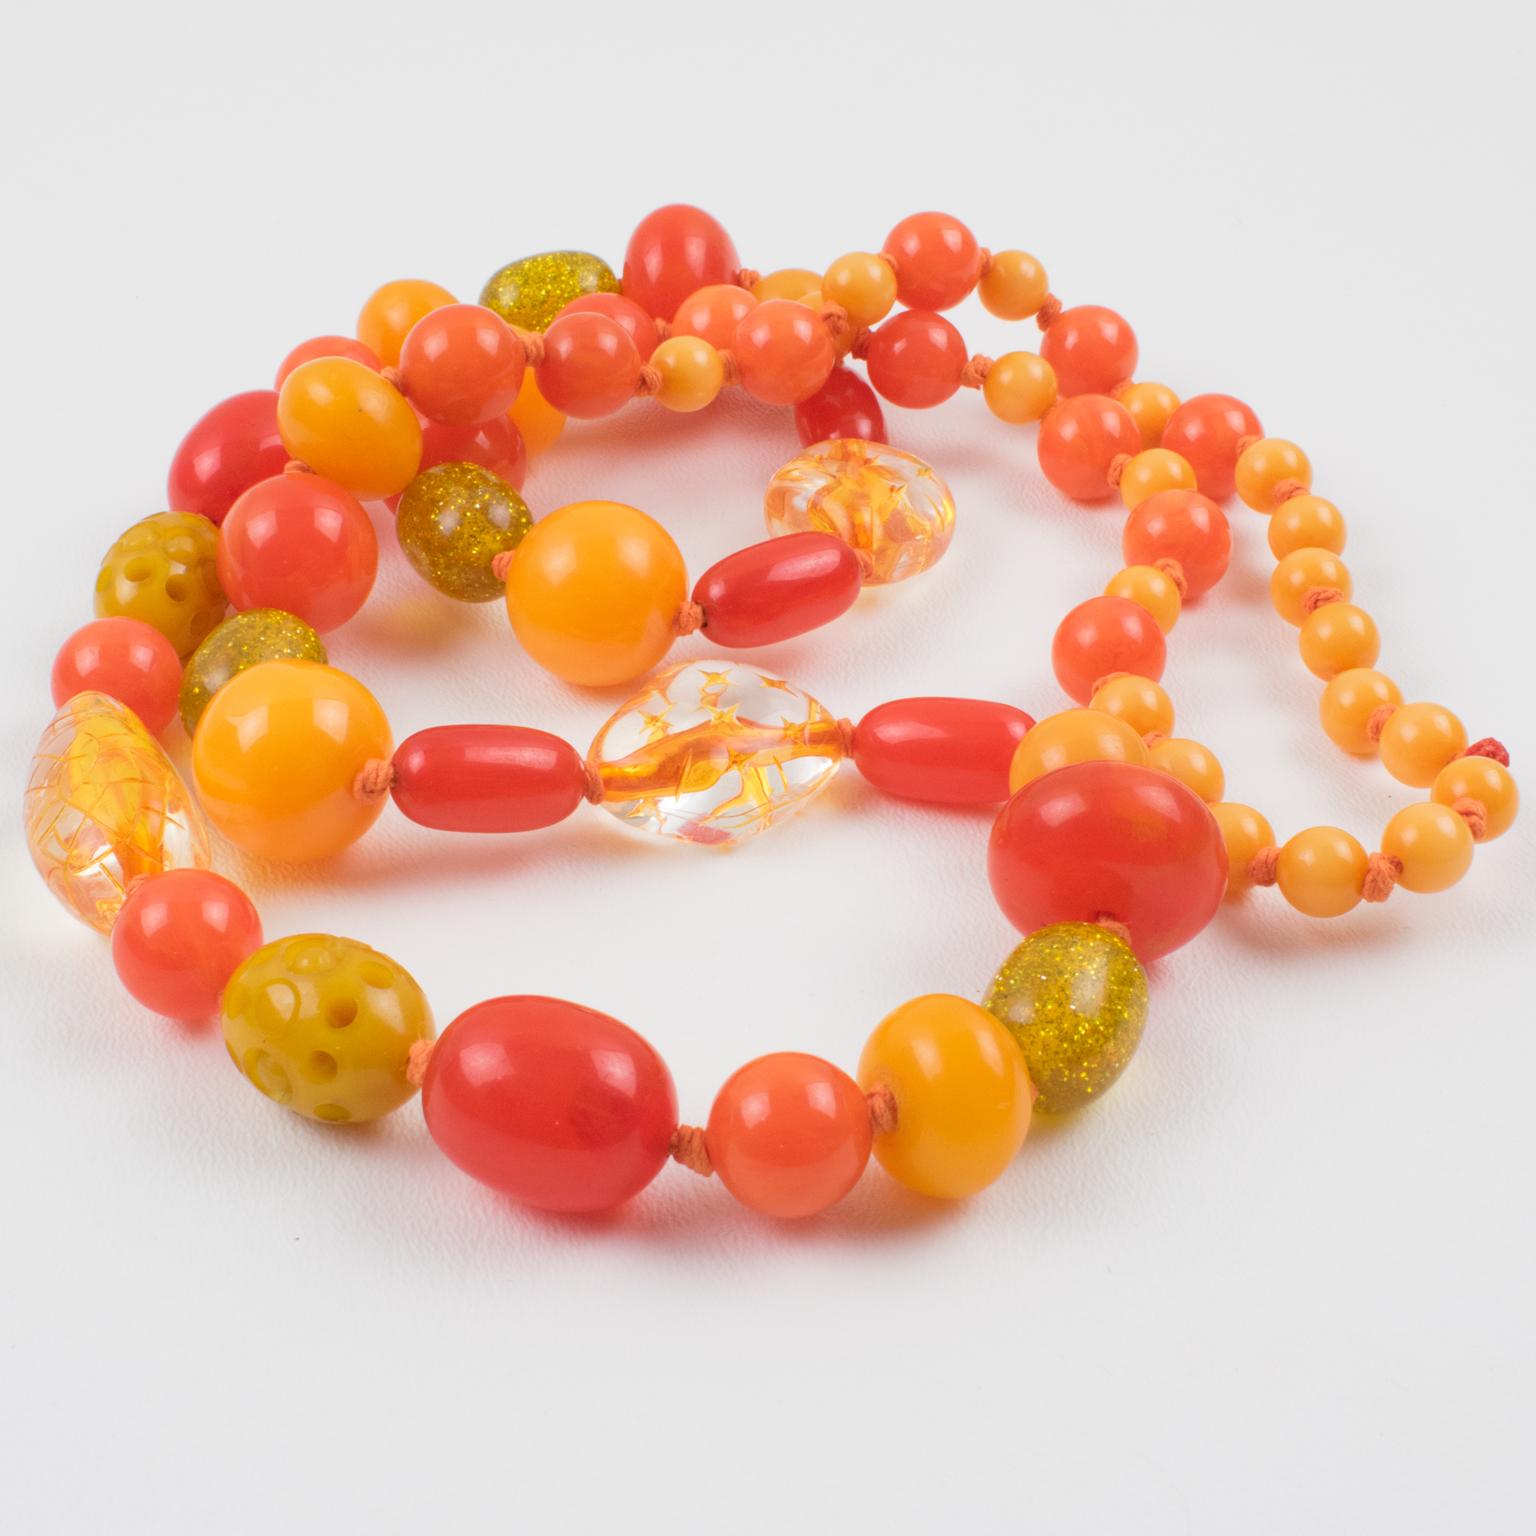 Women's Bakelite and Lucite Long Necklace Sunny Yellow and Orange Colors For Sale